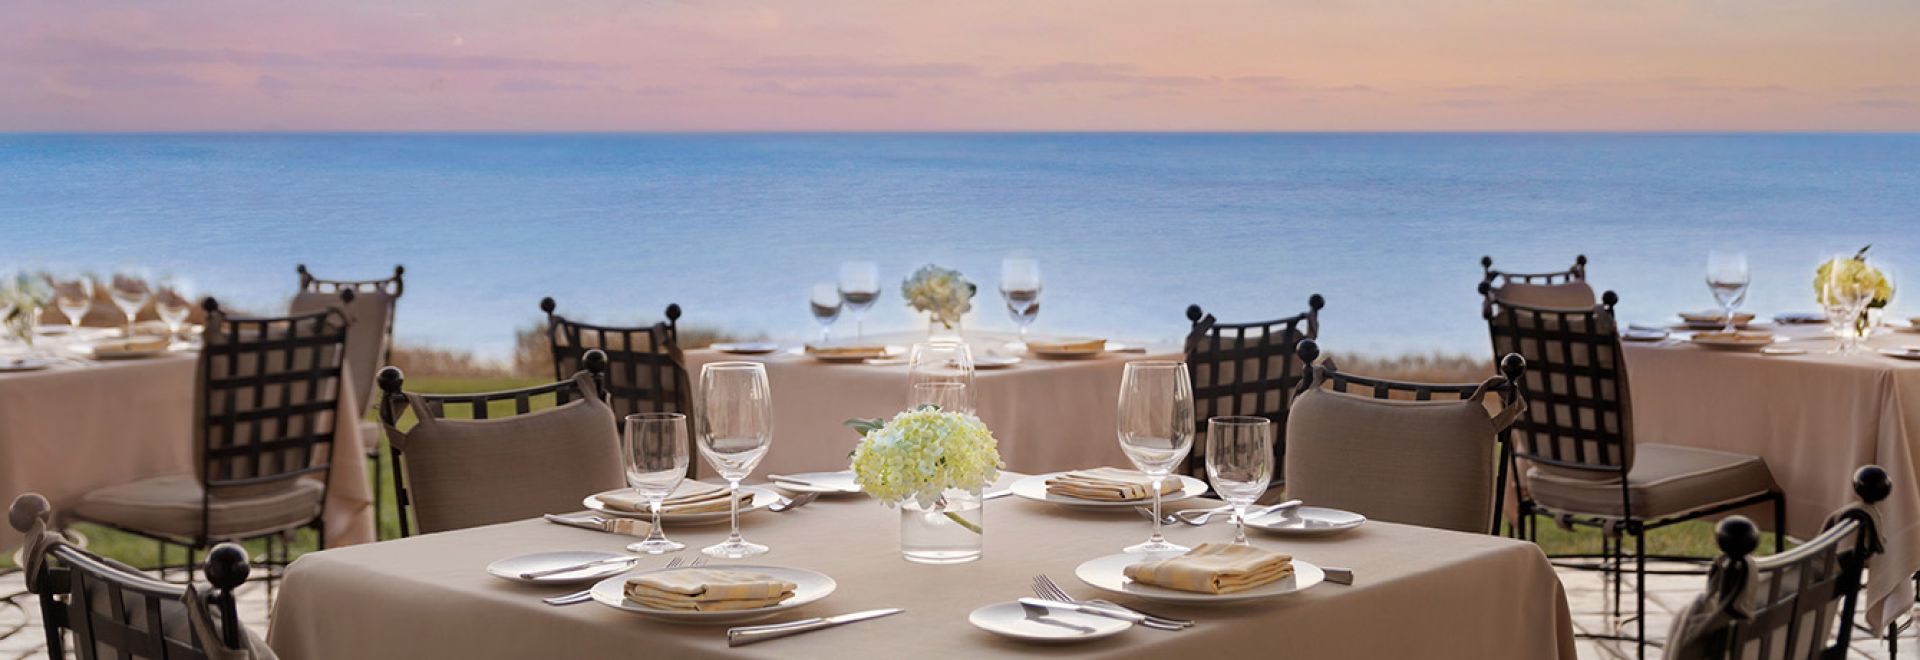 A Set Dining Table With Glasses And Plates On It By The Water